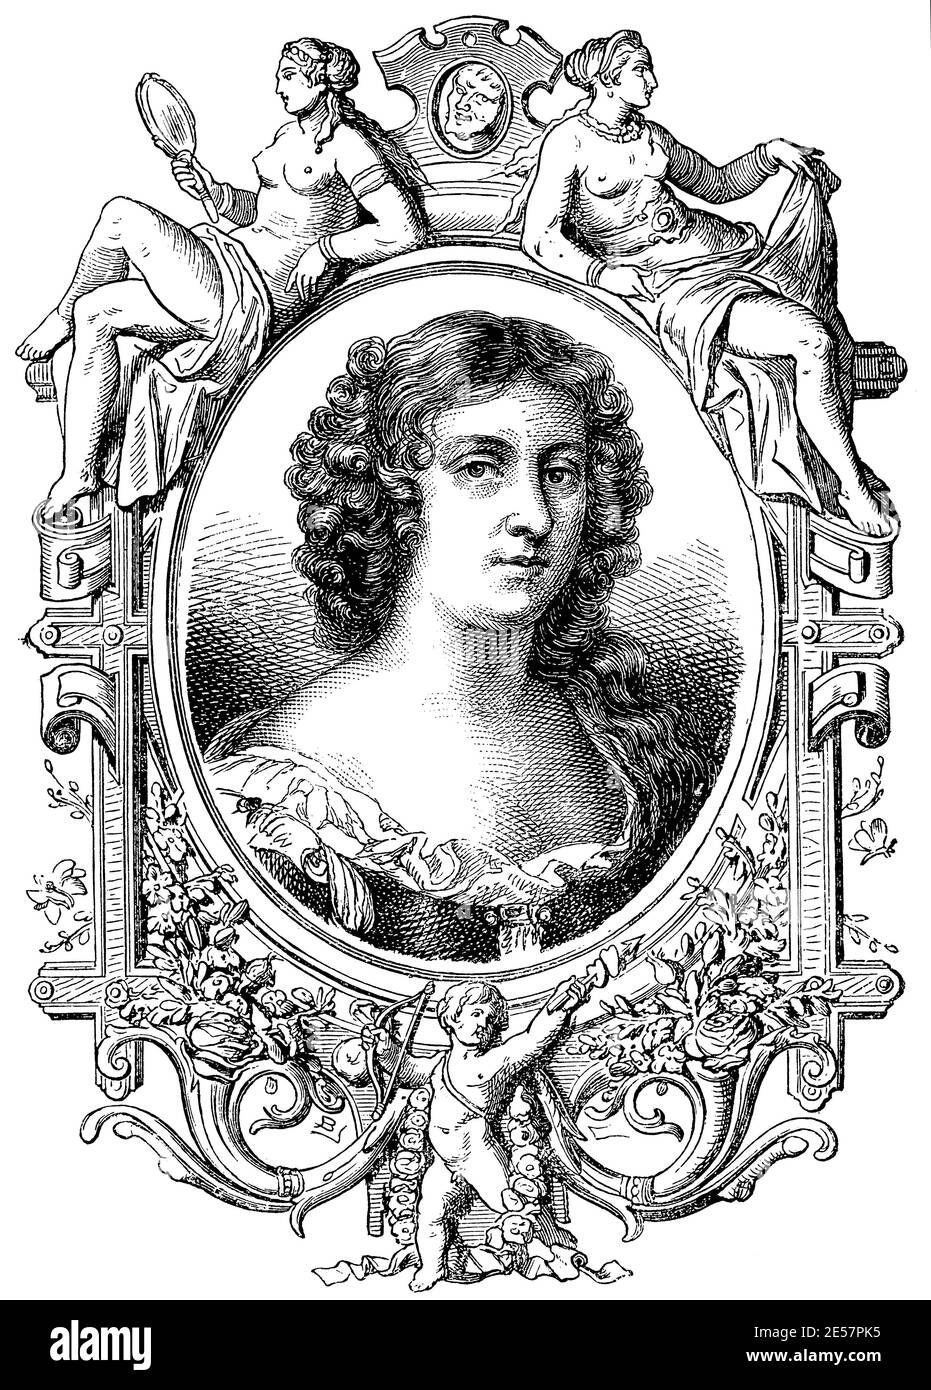 Portrait of Arabella Churchill - the mistress of King of England and Ireland as James II, and King of Scotland as James VII. Illustration of the 19th century. Germany. White background. Stock Photo